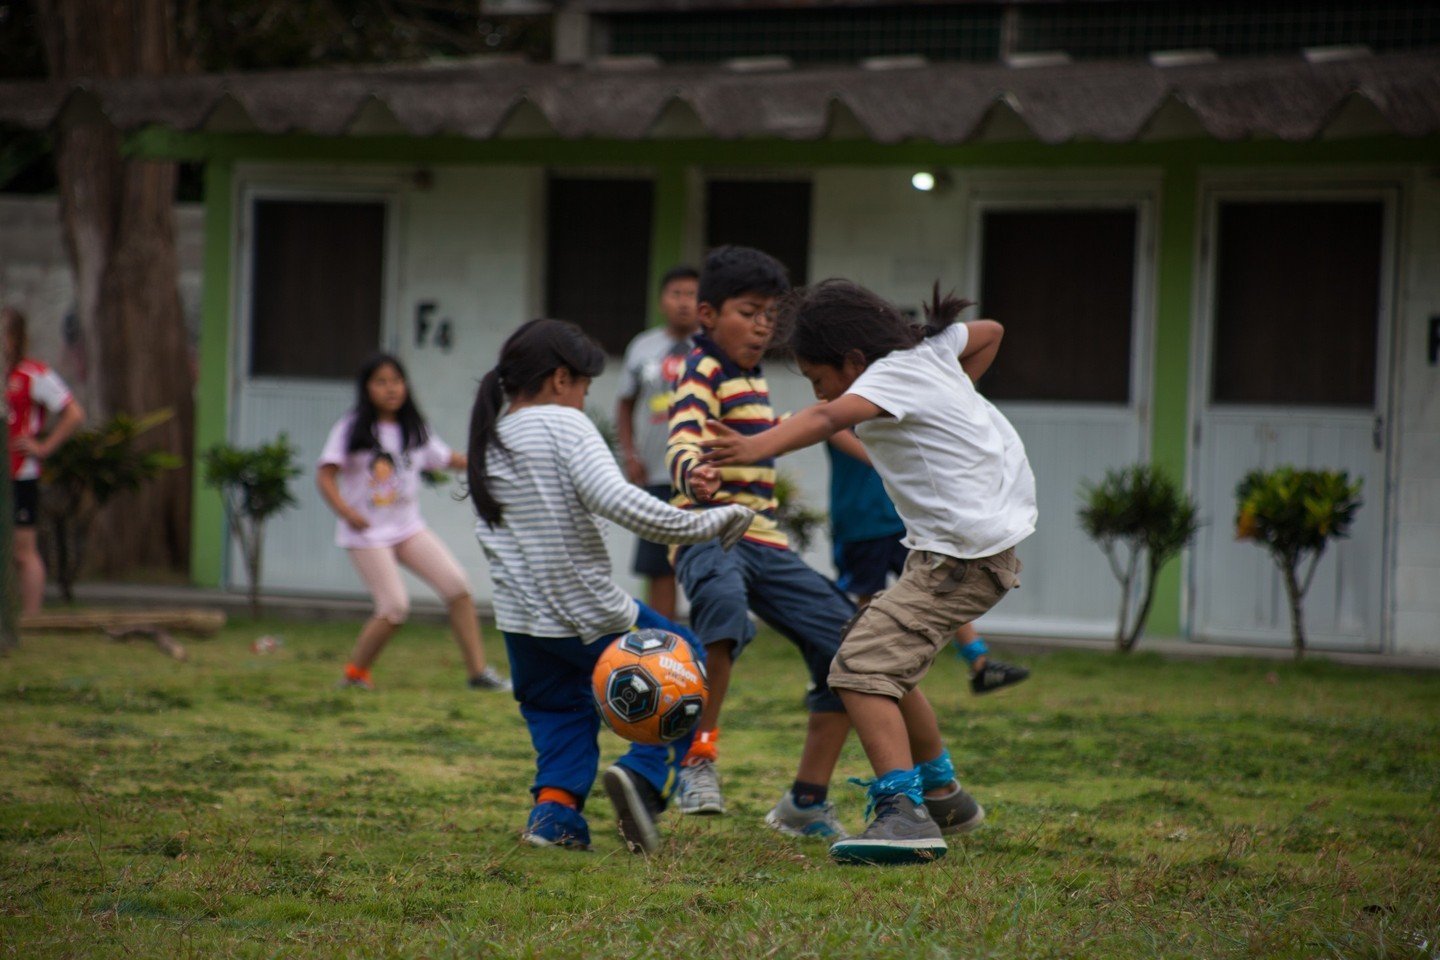 If you're a soccer player, Ecuador is the perfect mission trip for you. We evangelize AND play some fun soccer. It's a great way to bond with the kids and have fun! But be careful... you may find yourself losing to a 7 year old 🤪